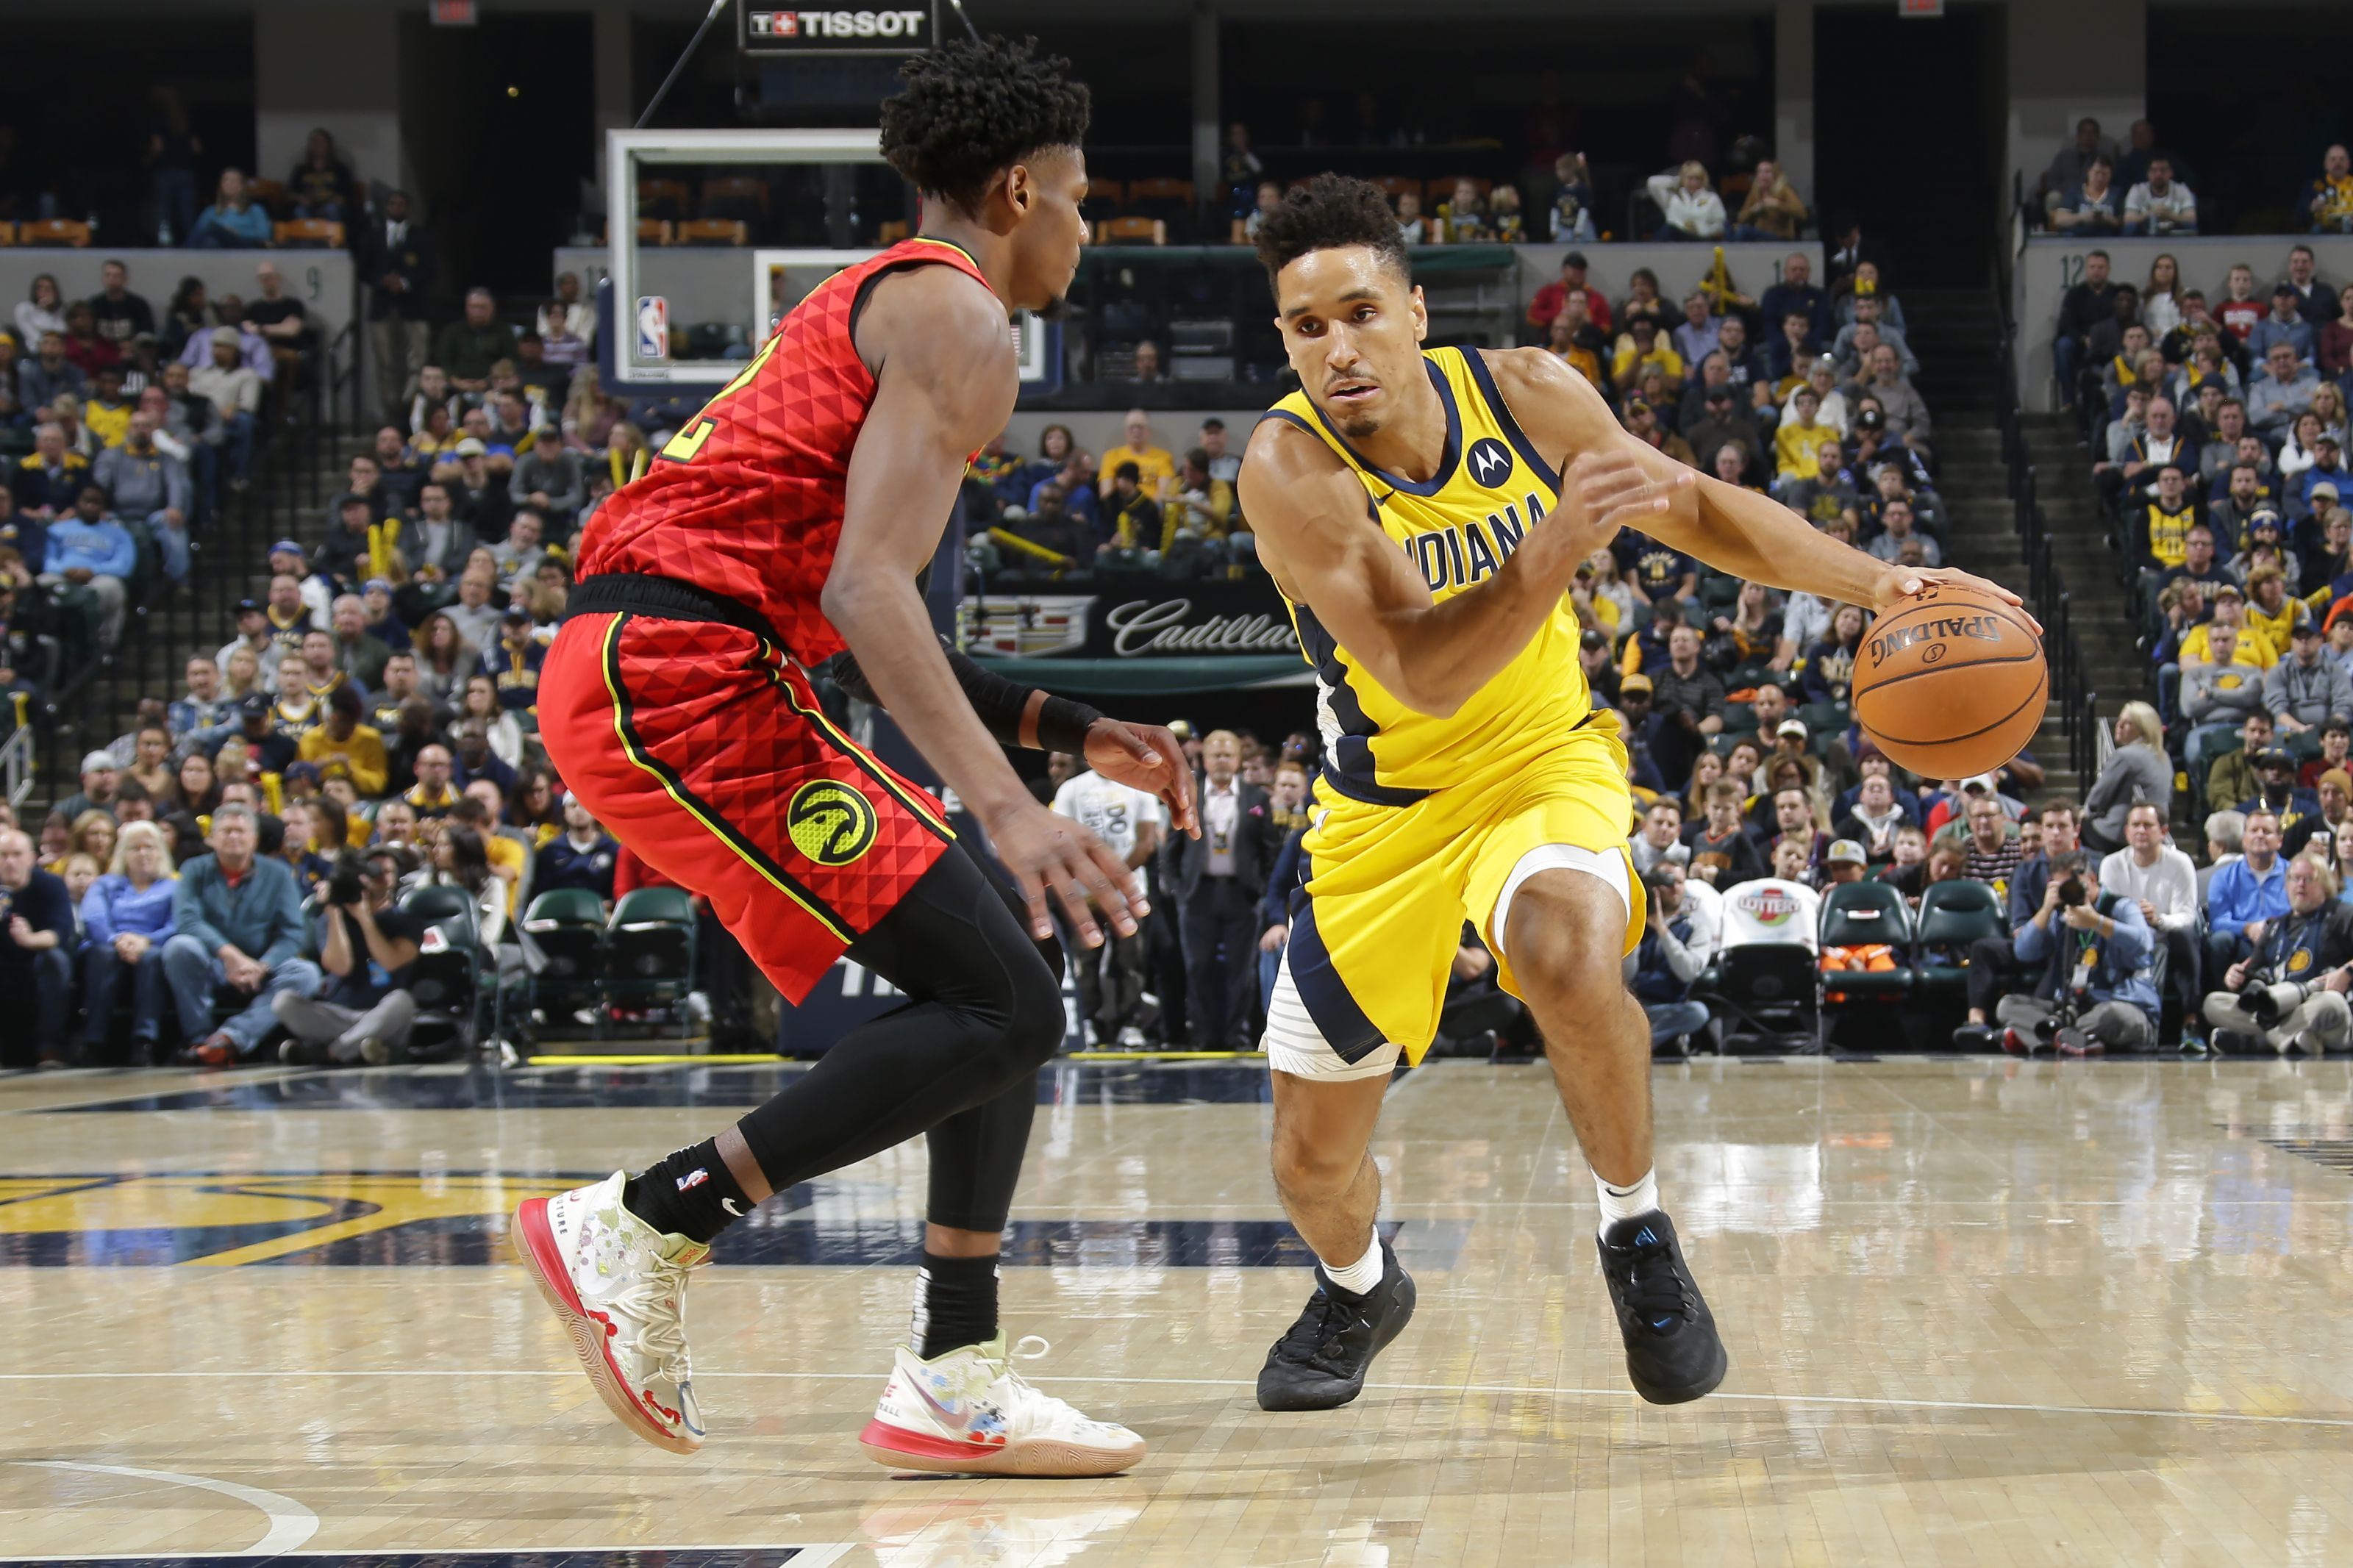 Pacers news: Malcolm Brogdon speaks on why Indiana was perfect fit